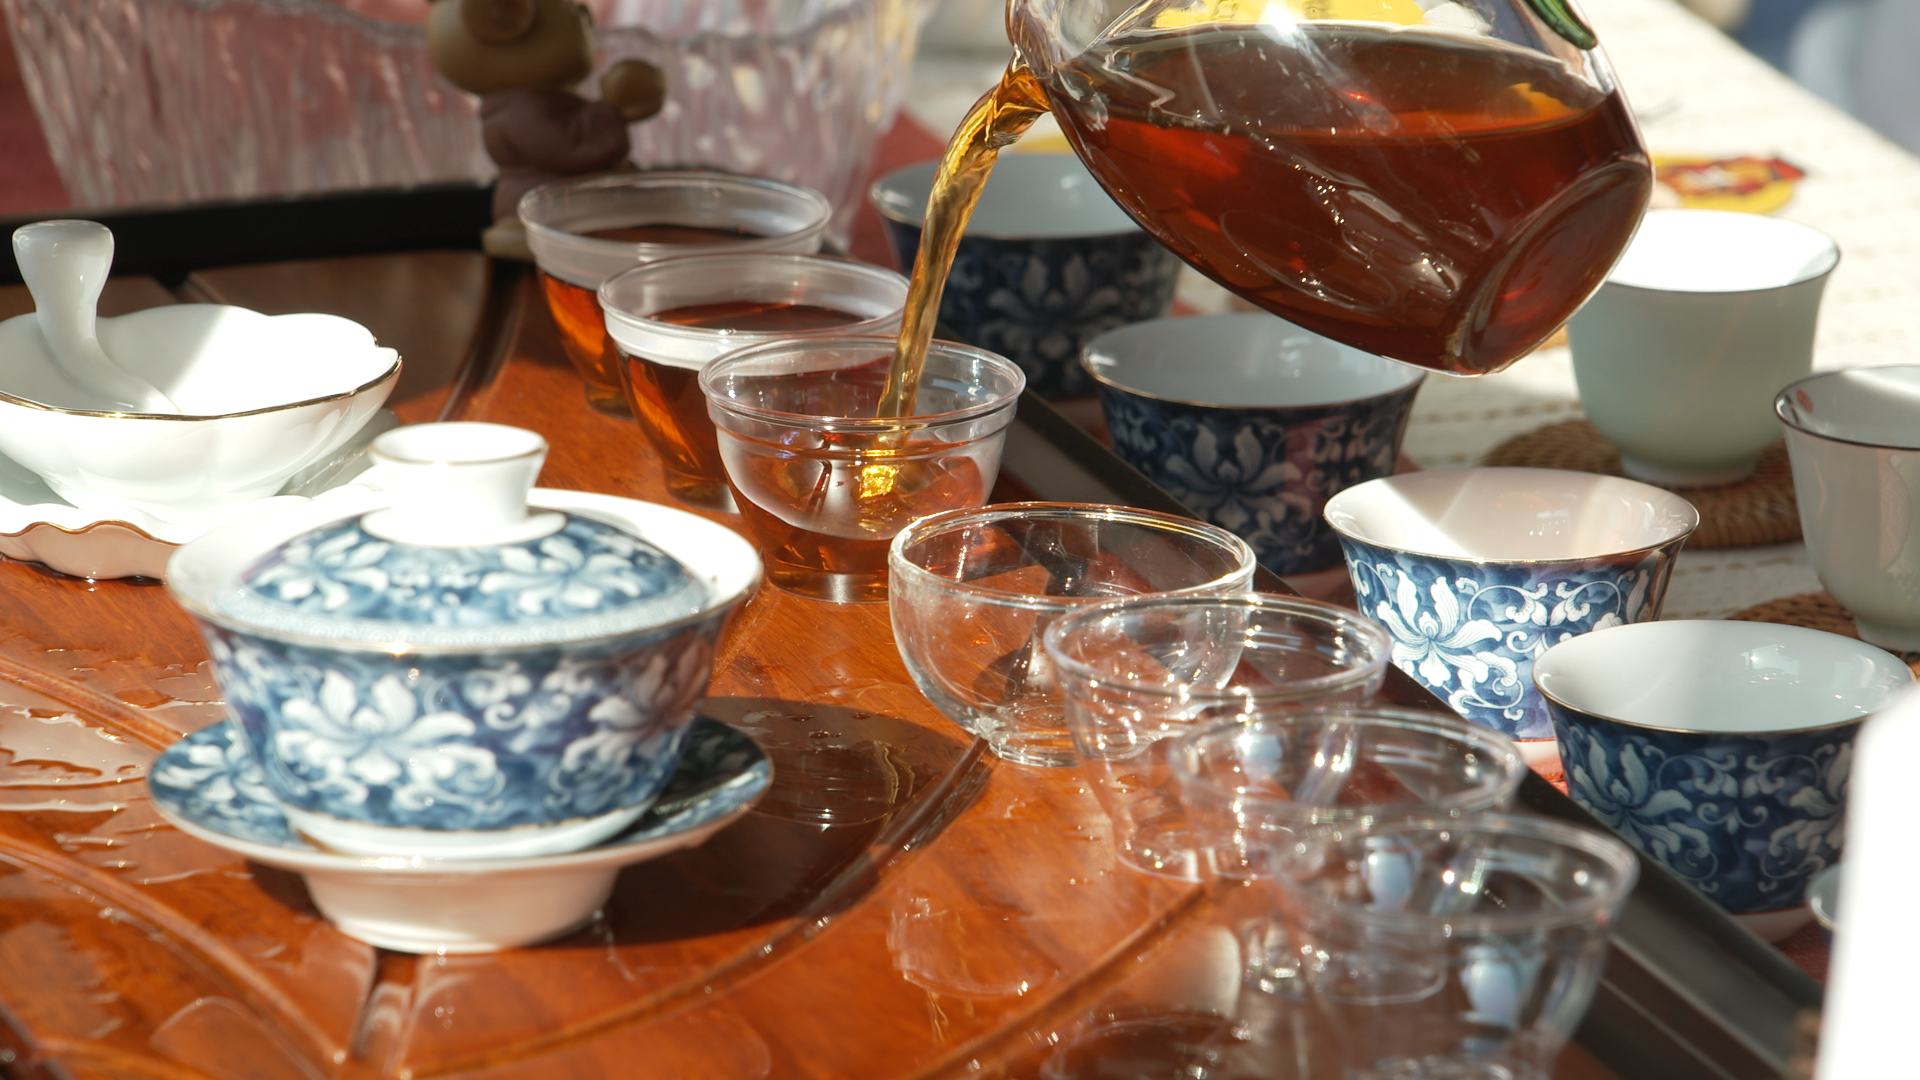 Learn about China’s tea culture at the Chinese Embassy on International Tea Day